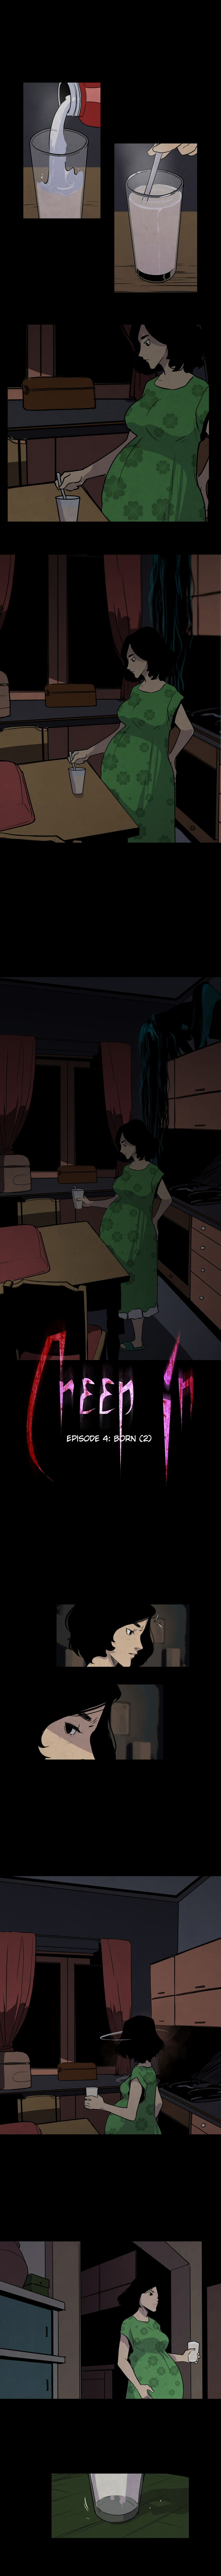 Creep In Chapter 4 #2